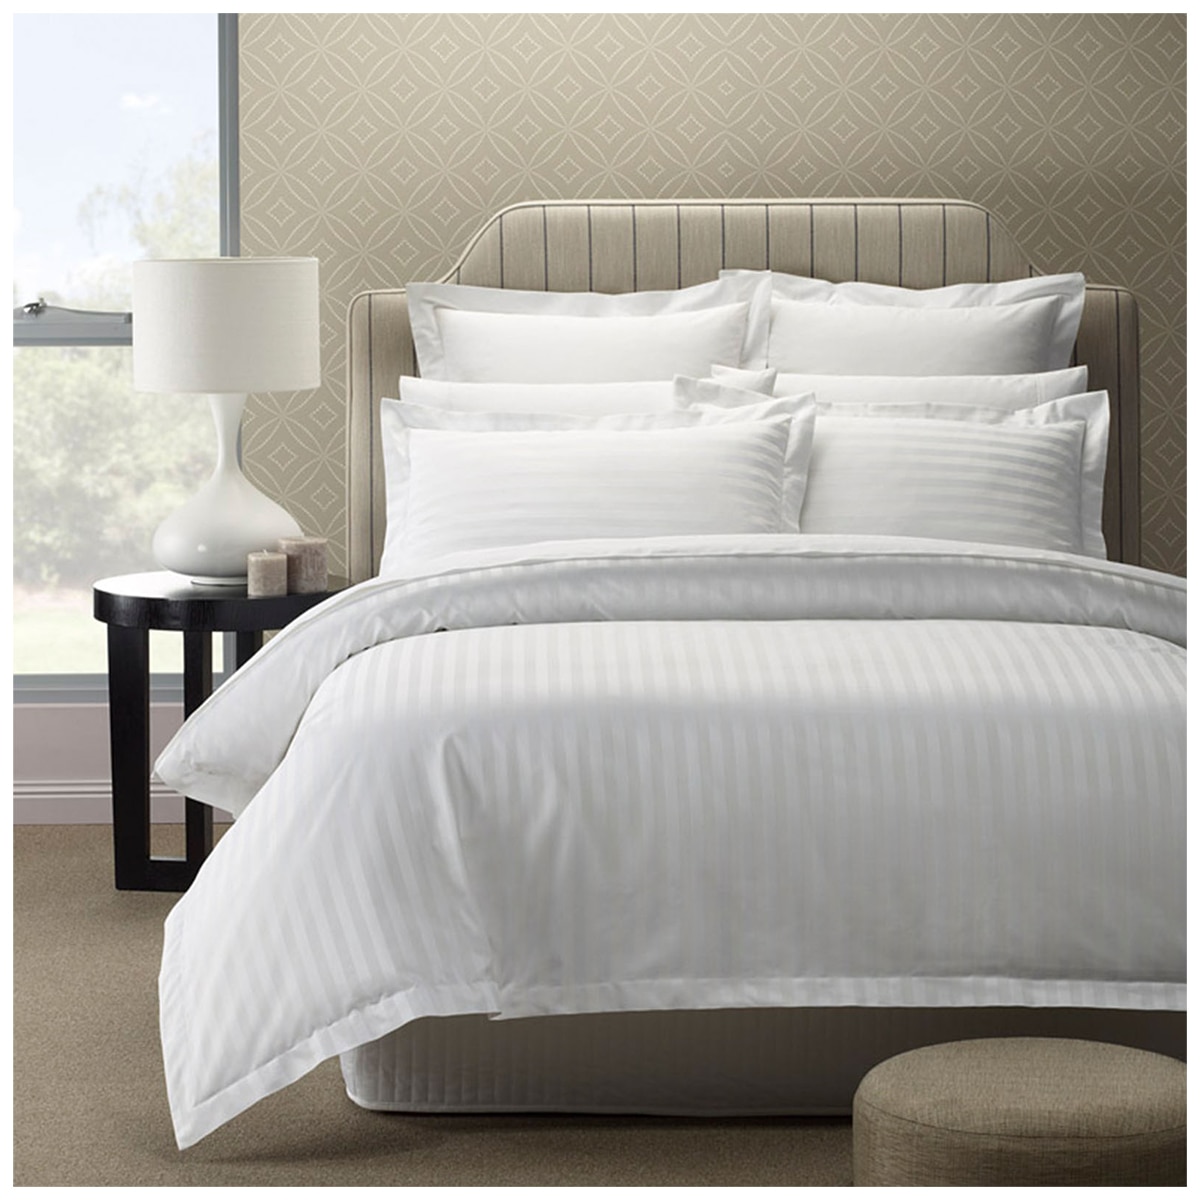 Bdirect Royal Comfort 1200 Thread count Damask Stripe Cotton Blend Quilt Cover Sets King White